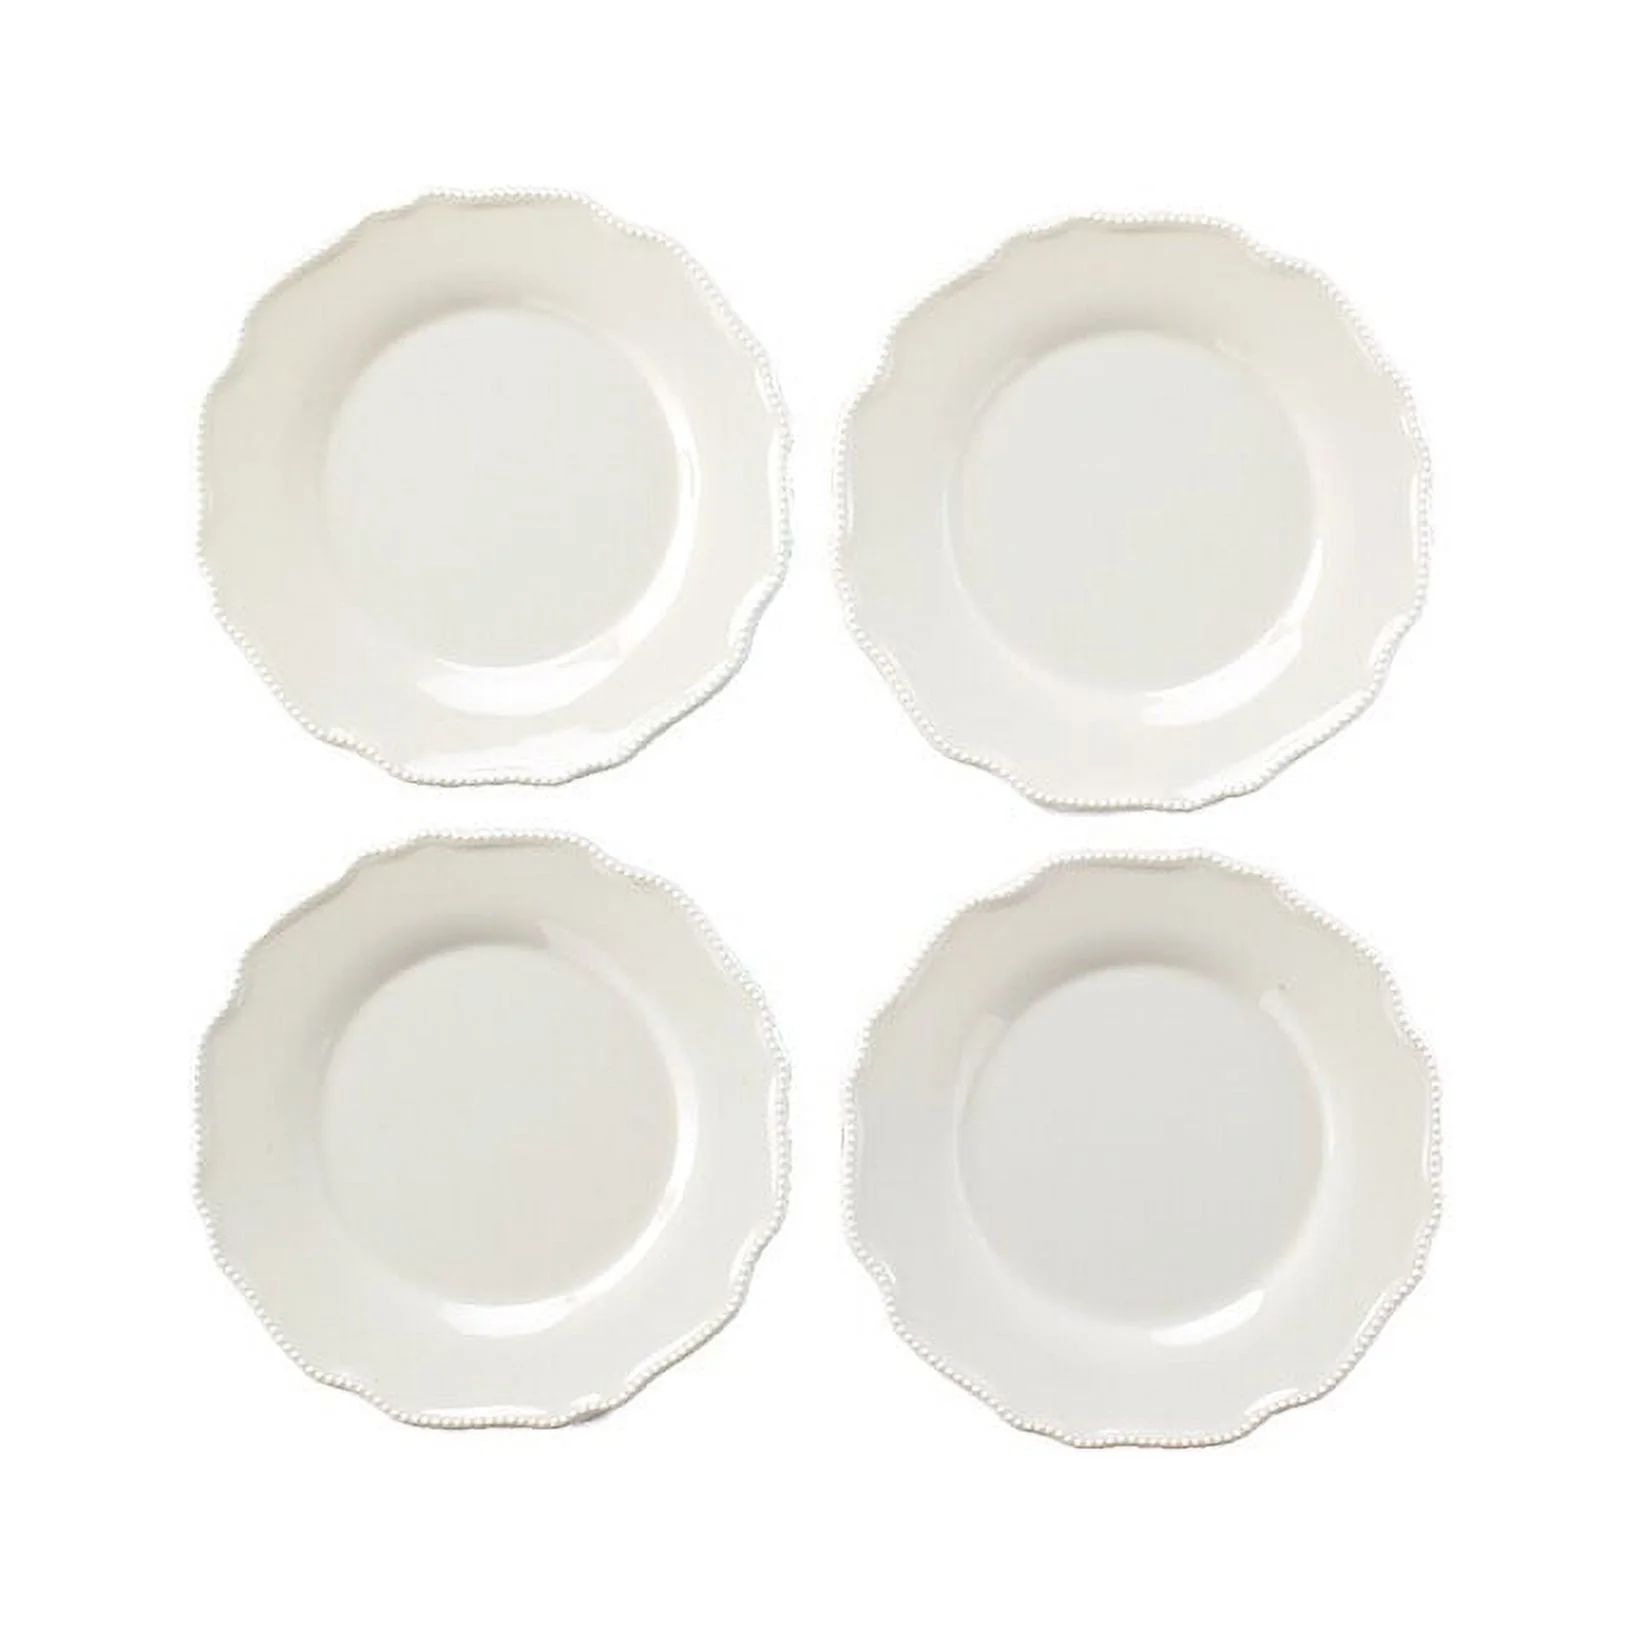 Holiday Place Setting Collection - Salad Plates | Walmart (US)